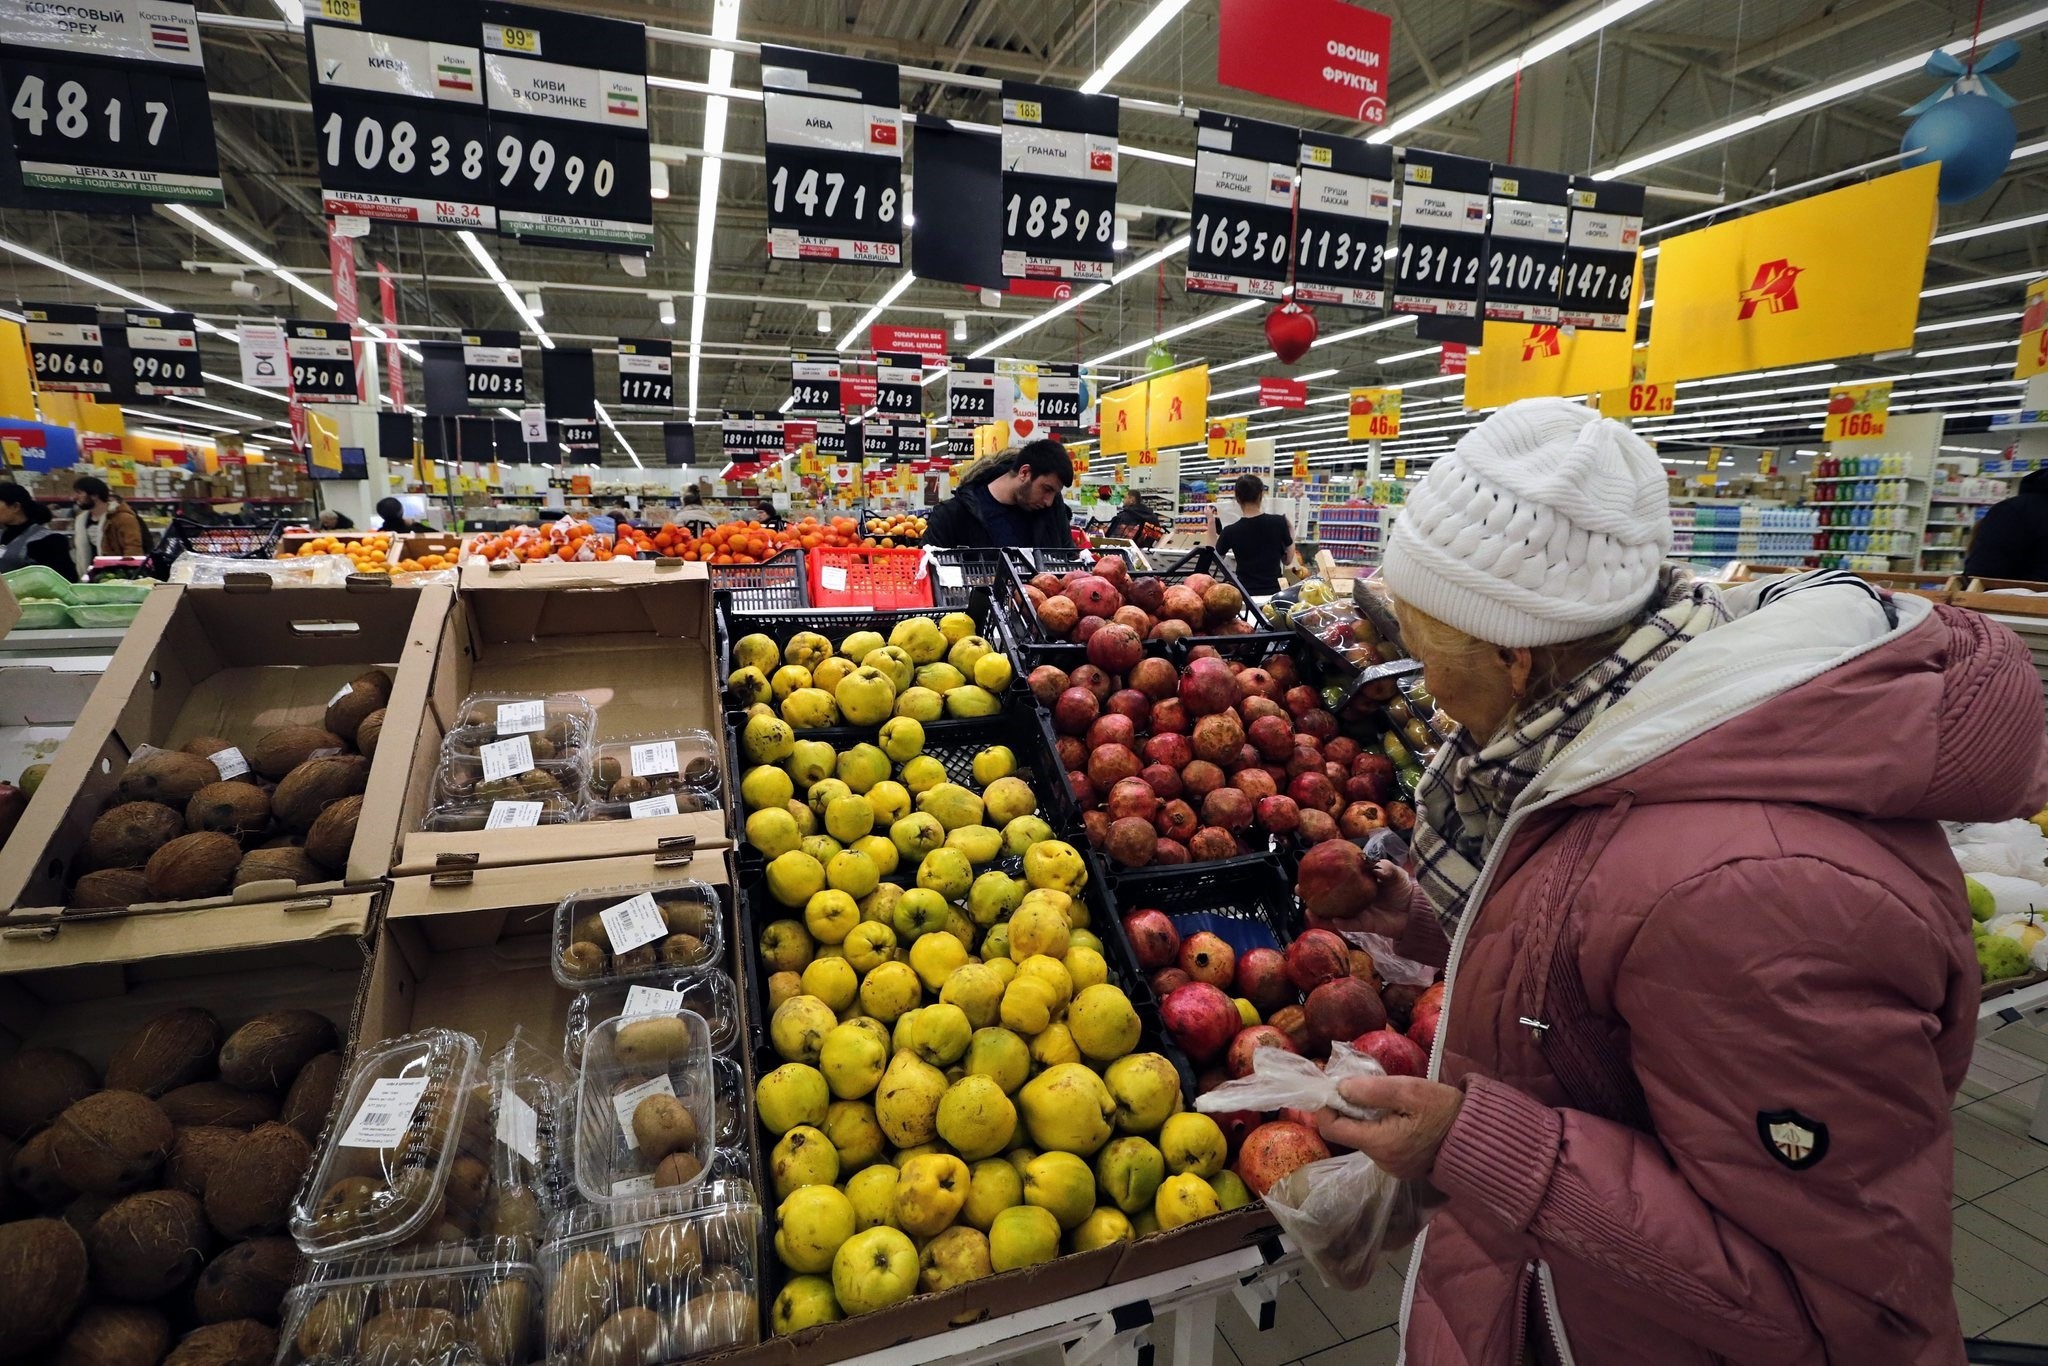  A Russian woman chooses Turkish fruits at a supermarket in St. Petersburg, Russia, 02 December 2015. (EPA Photo)